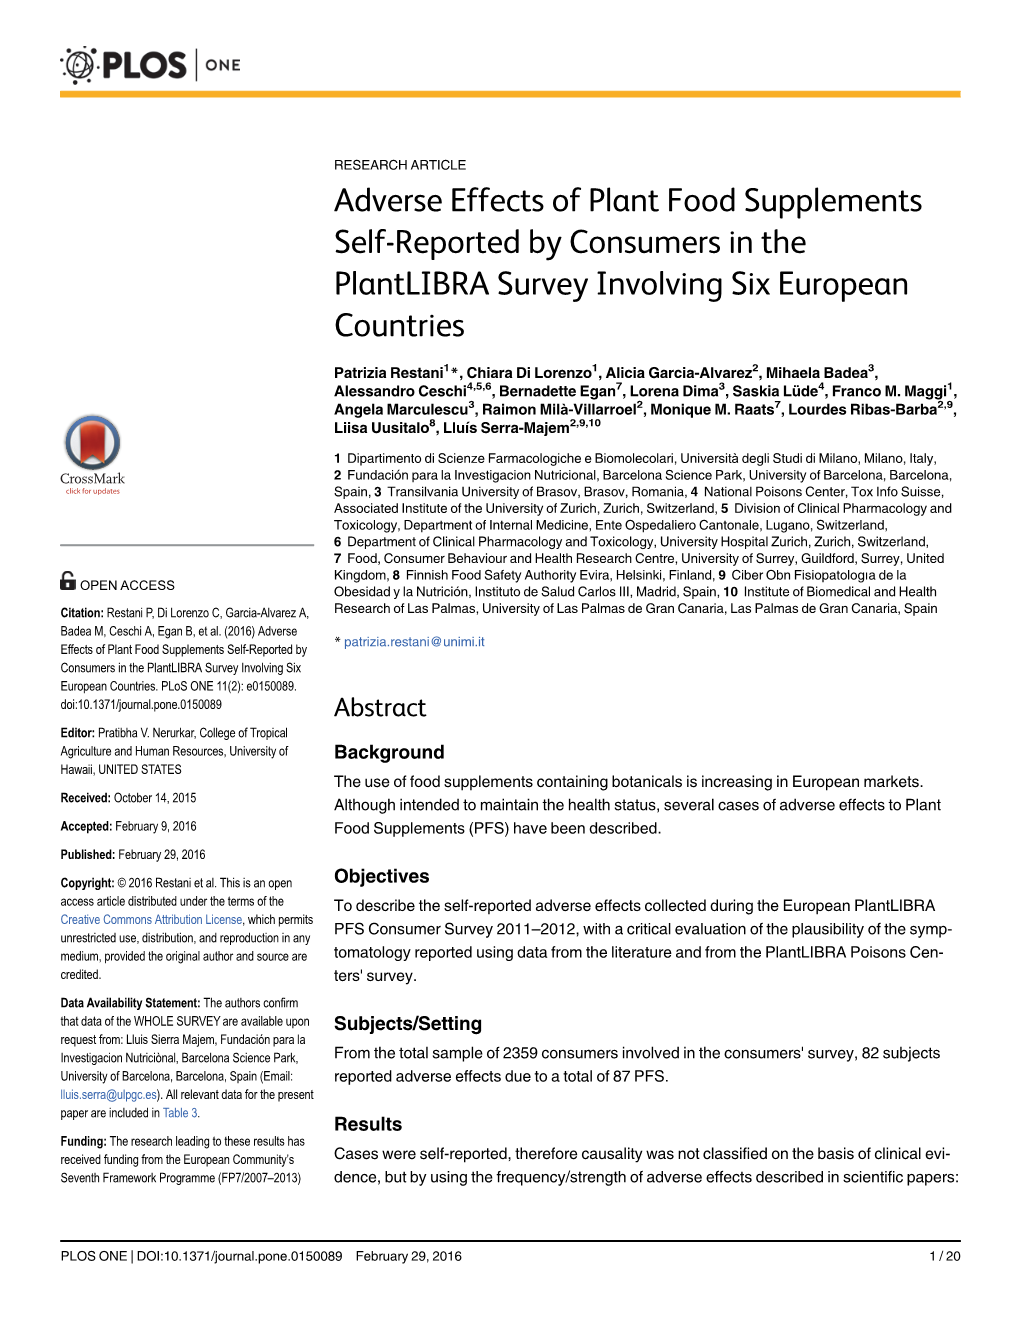 Adverse Effects of Plant Food Supplements Self-Reported by Consumers in the Plantlibra Survey Involving Six European Countries